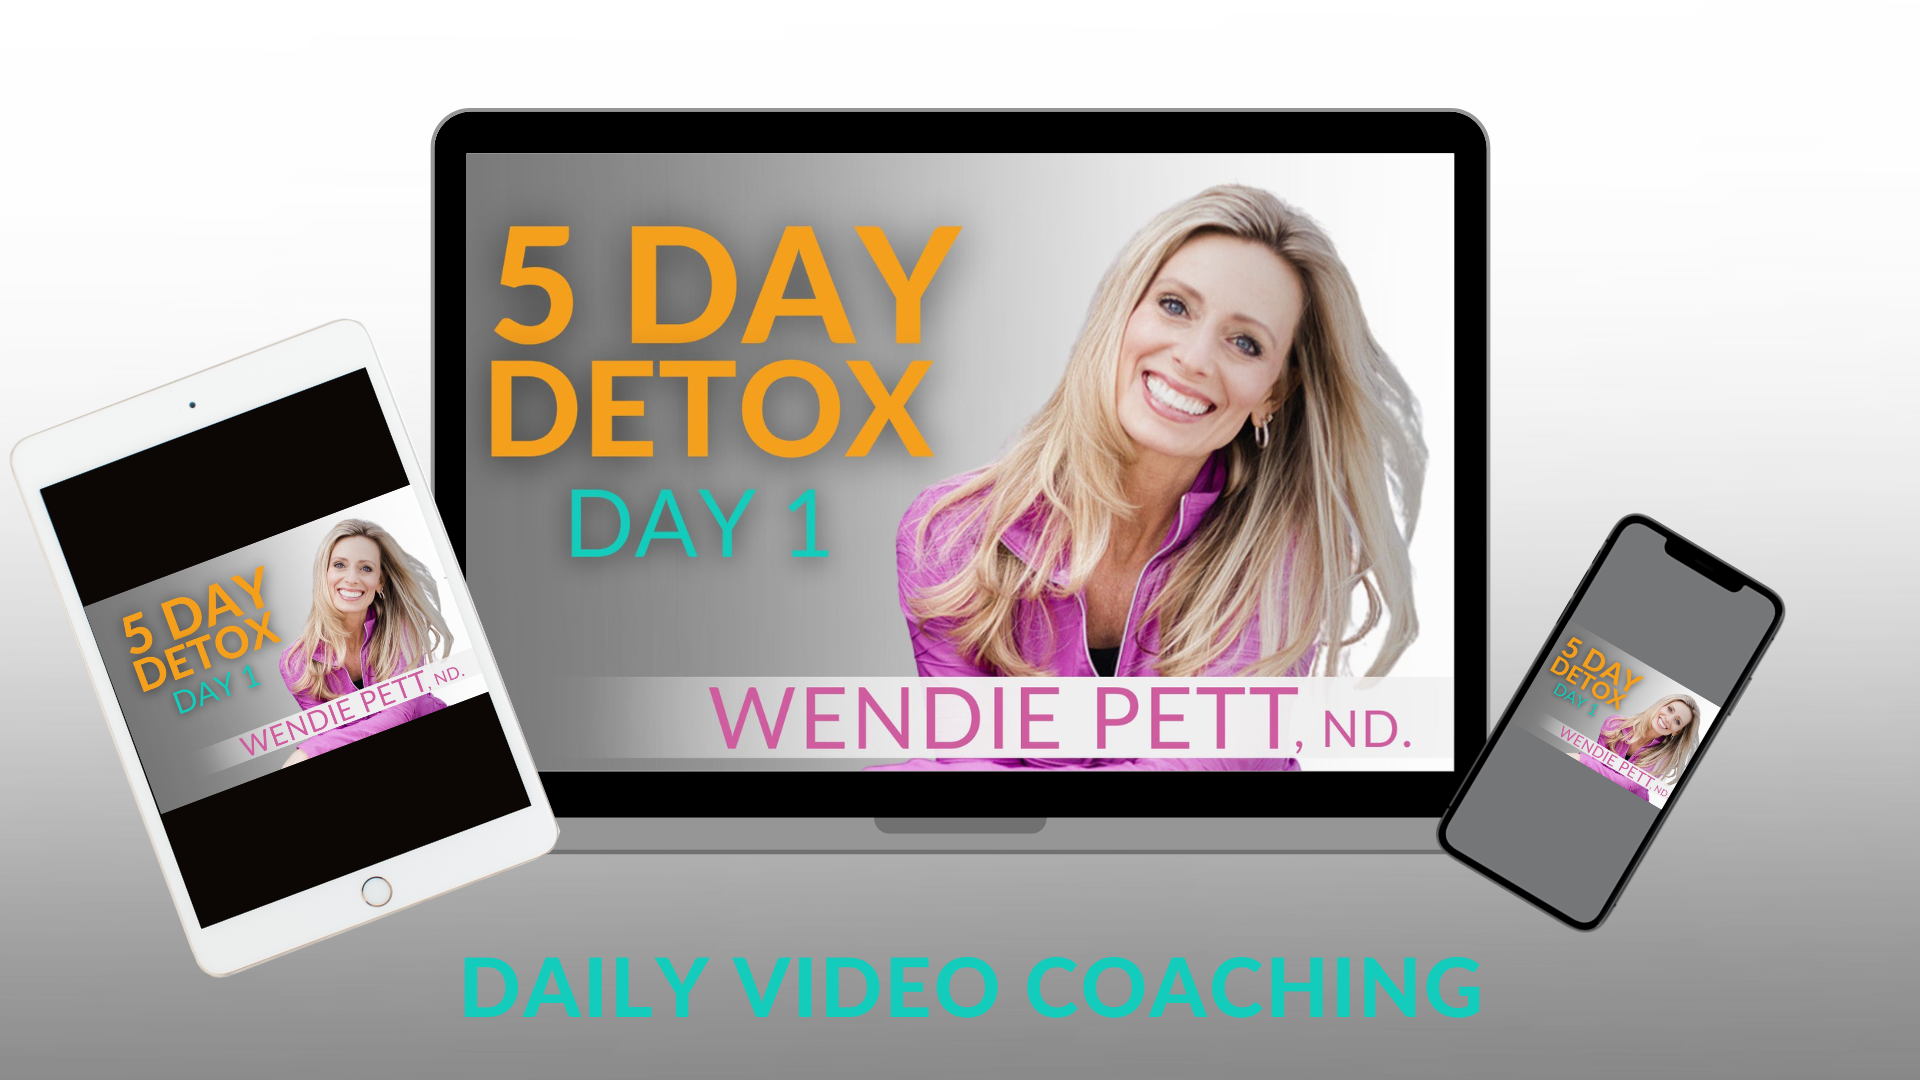 5 Day Detox + Reboot Daily Video Coaching with Wendie Pett